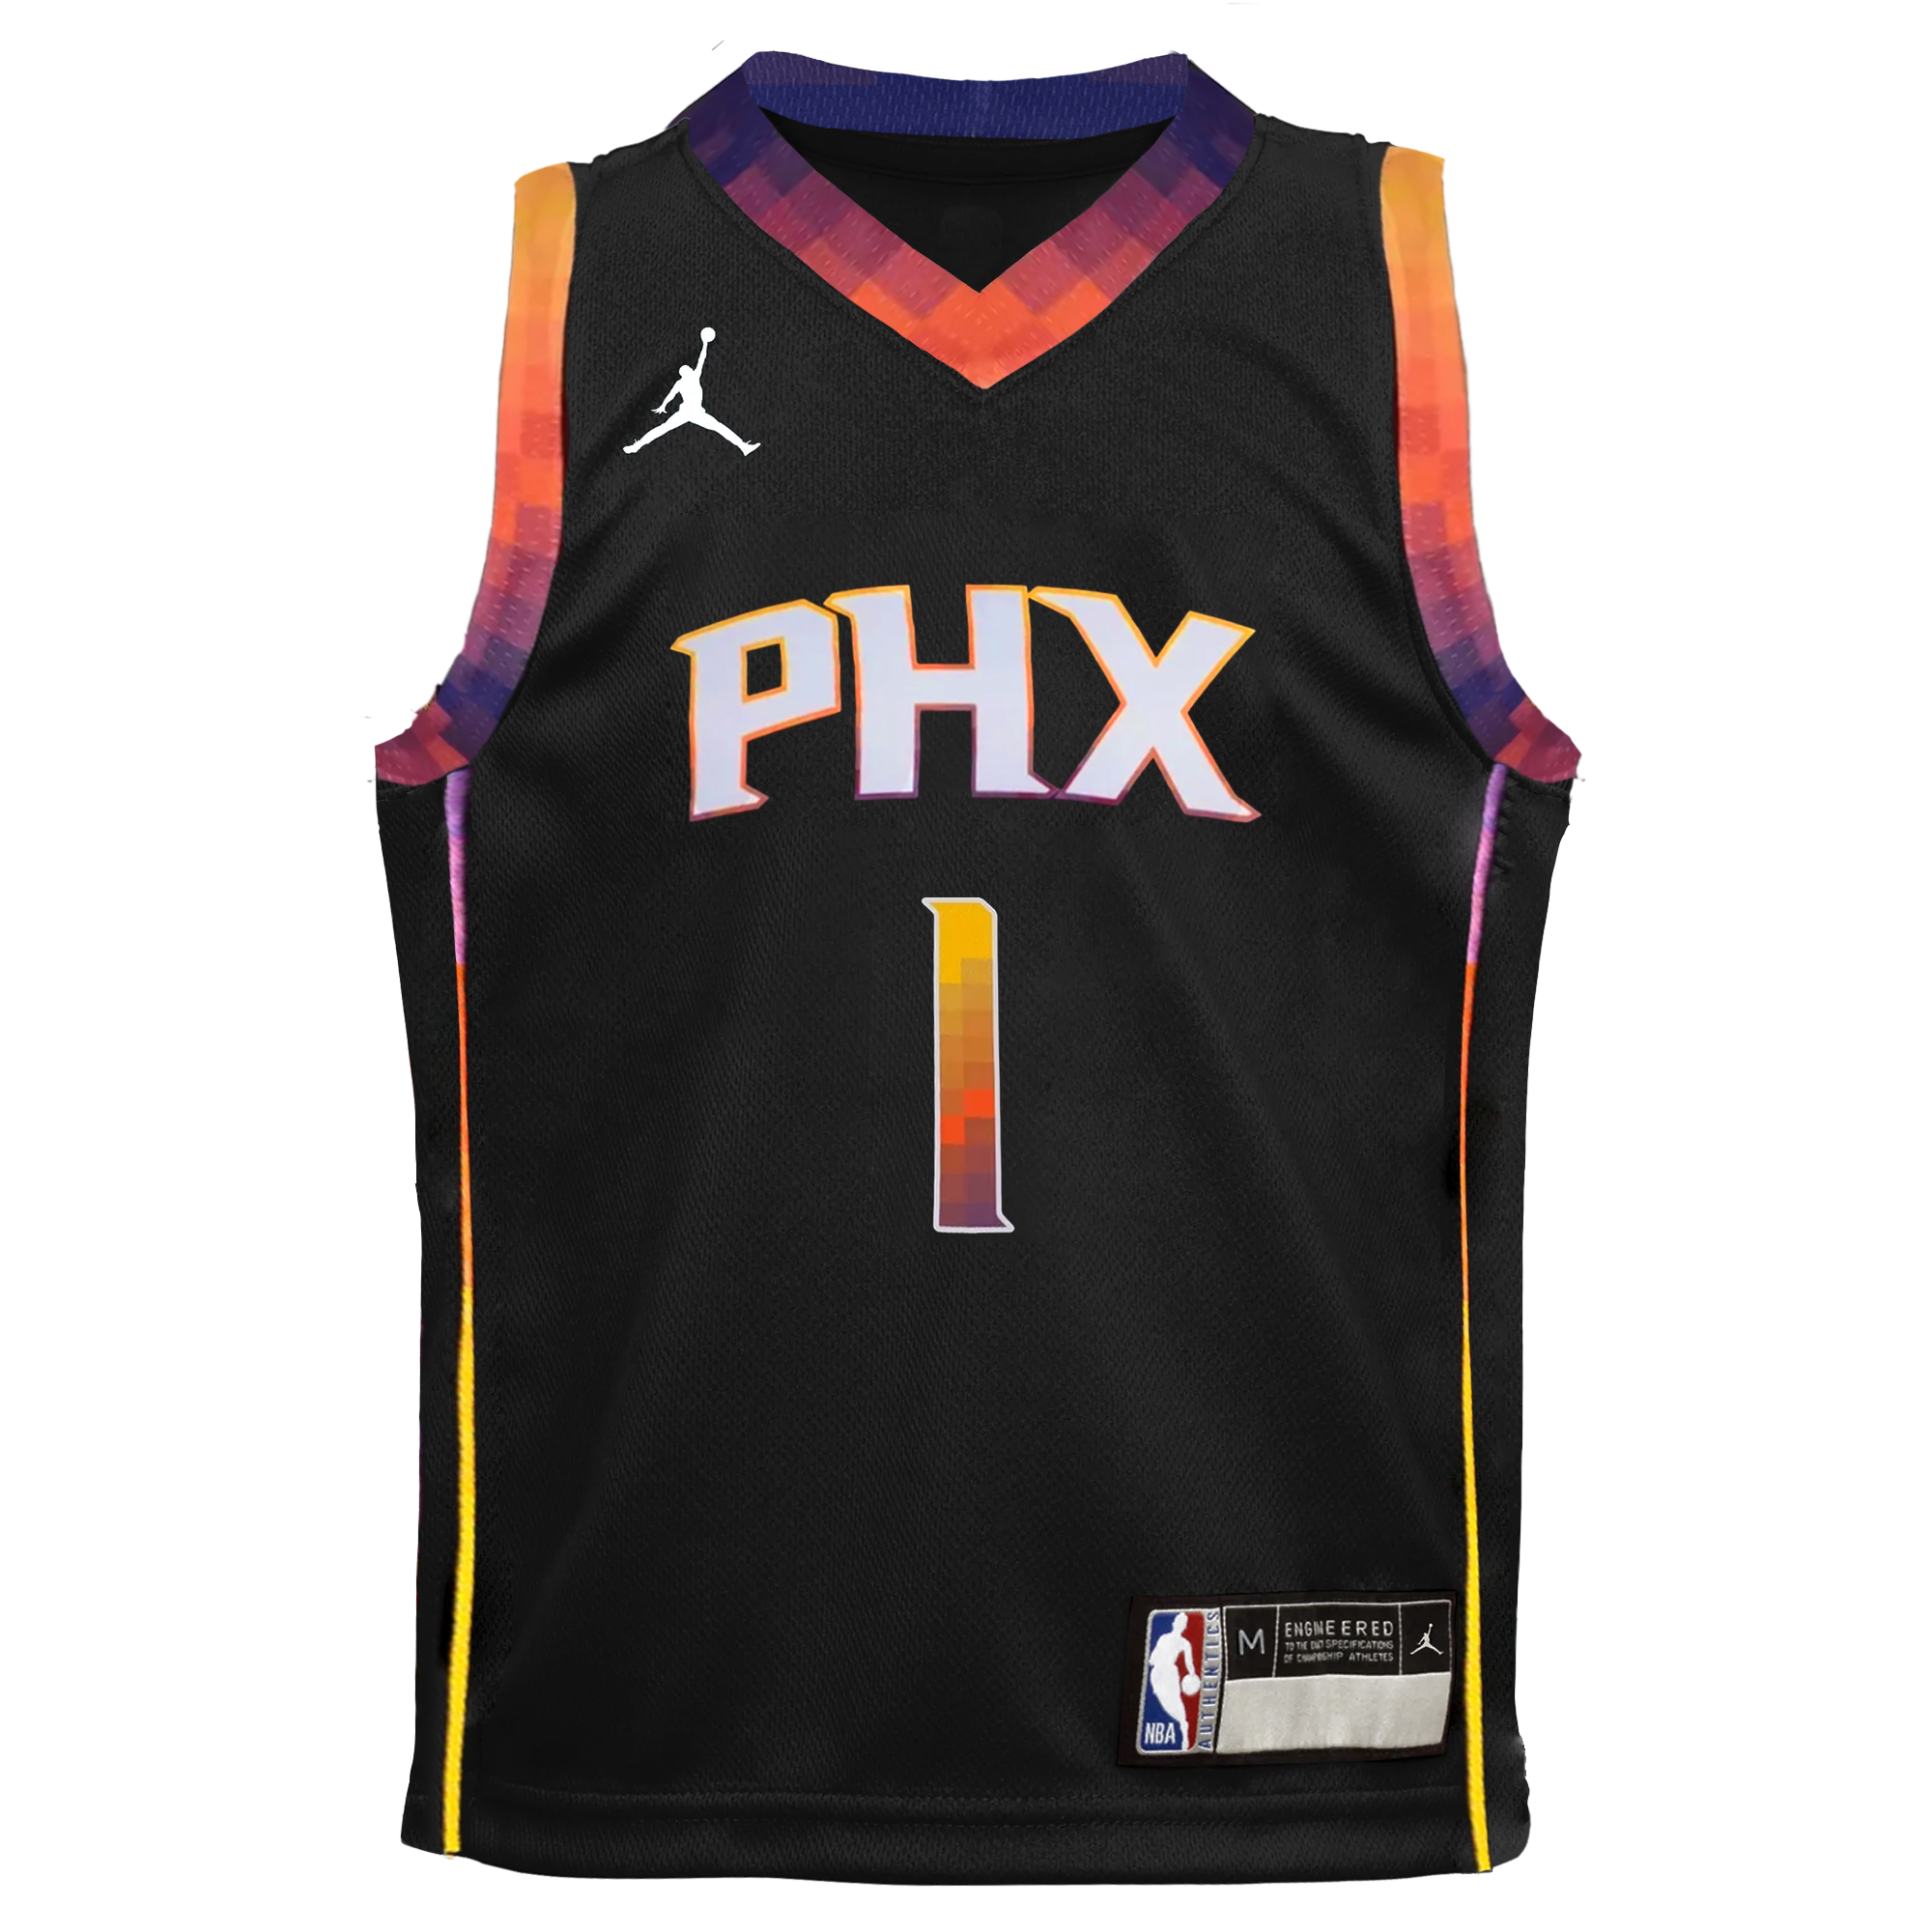 Nike Phoenix Suns City Edition Devin Booker Authentic Jersey Mens Small (40)